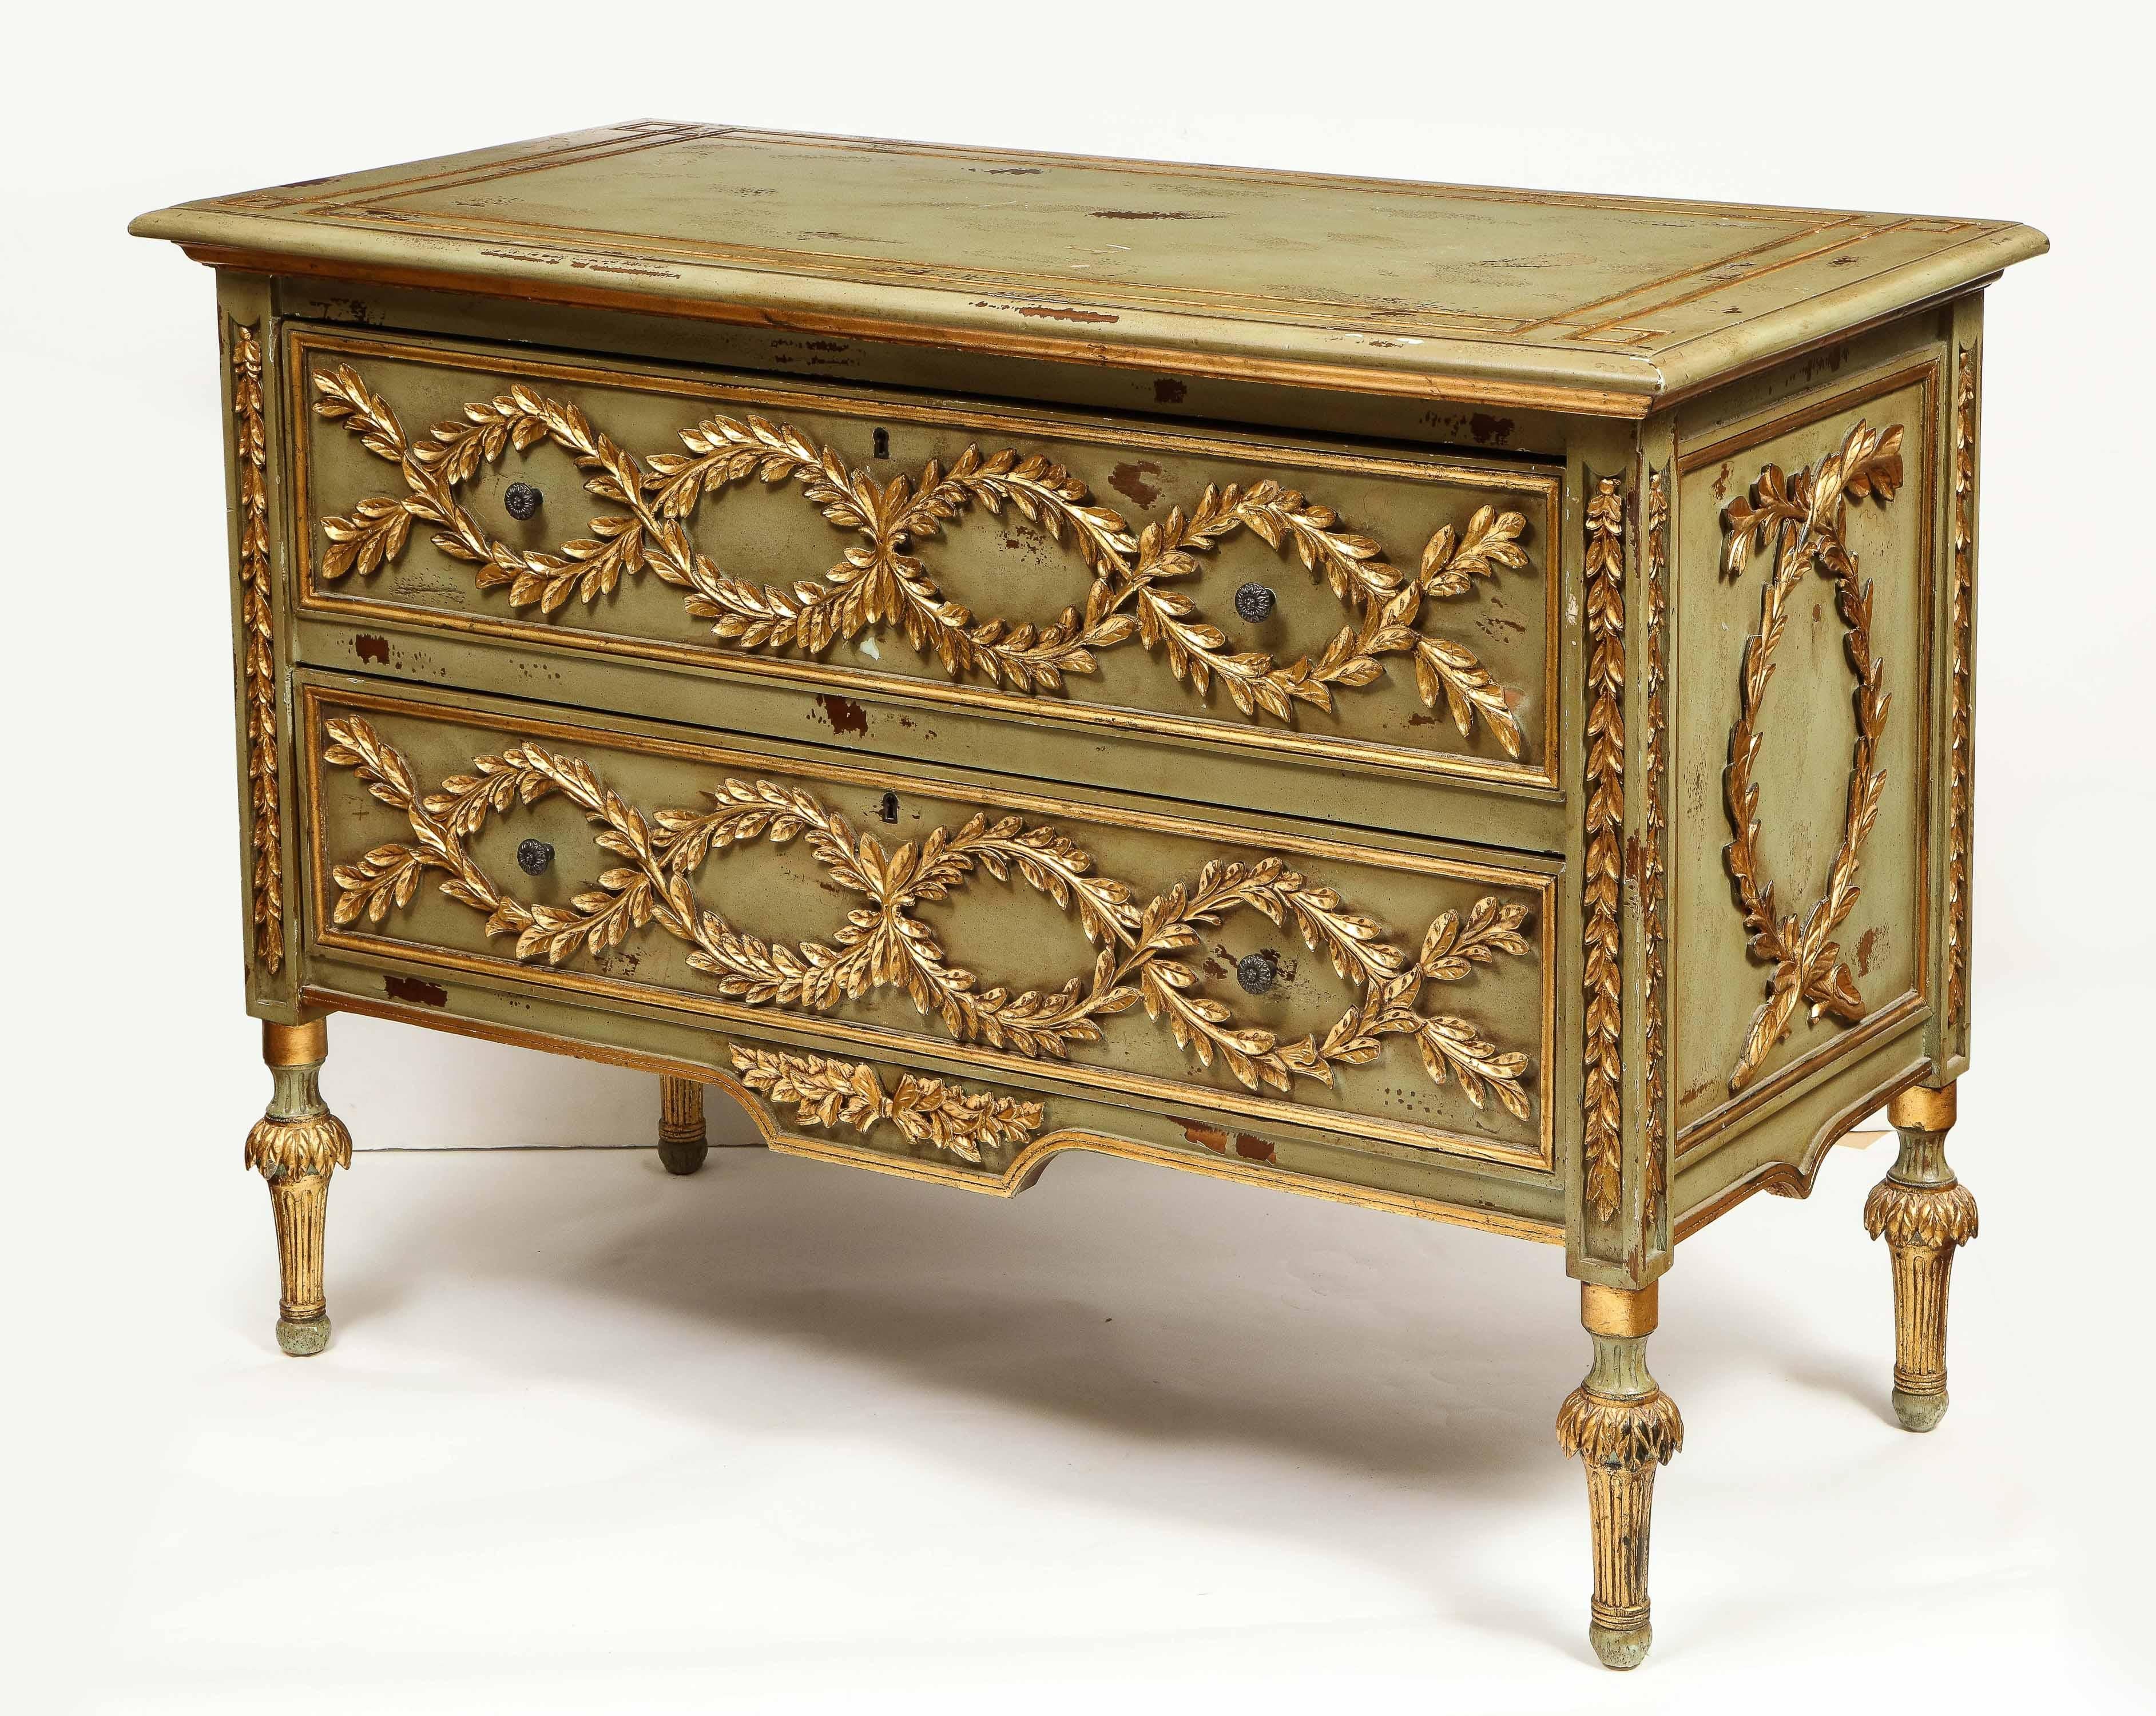 Giltwood Exceptional Pair of French Provincial Green Painted and Parcel-Gilt Commodes